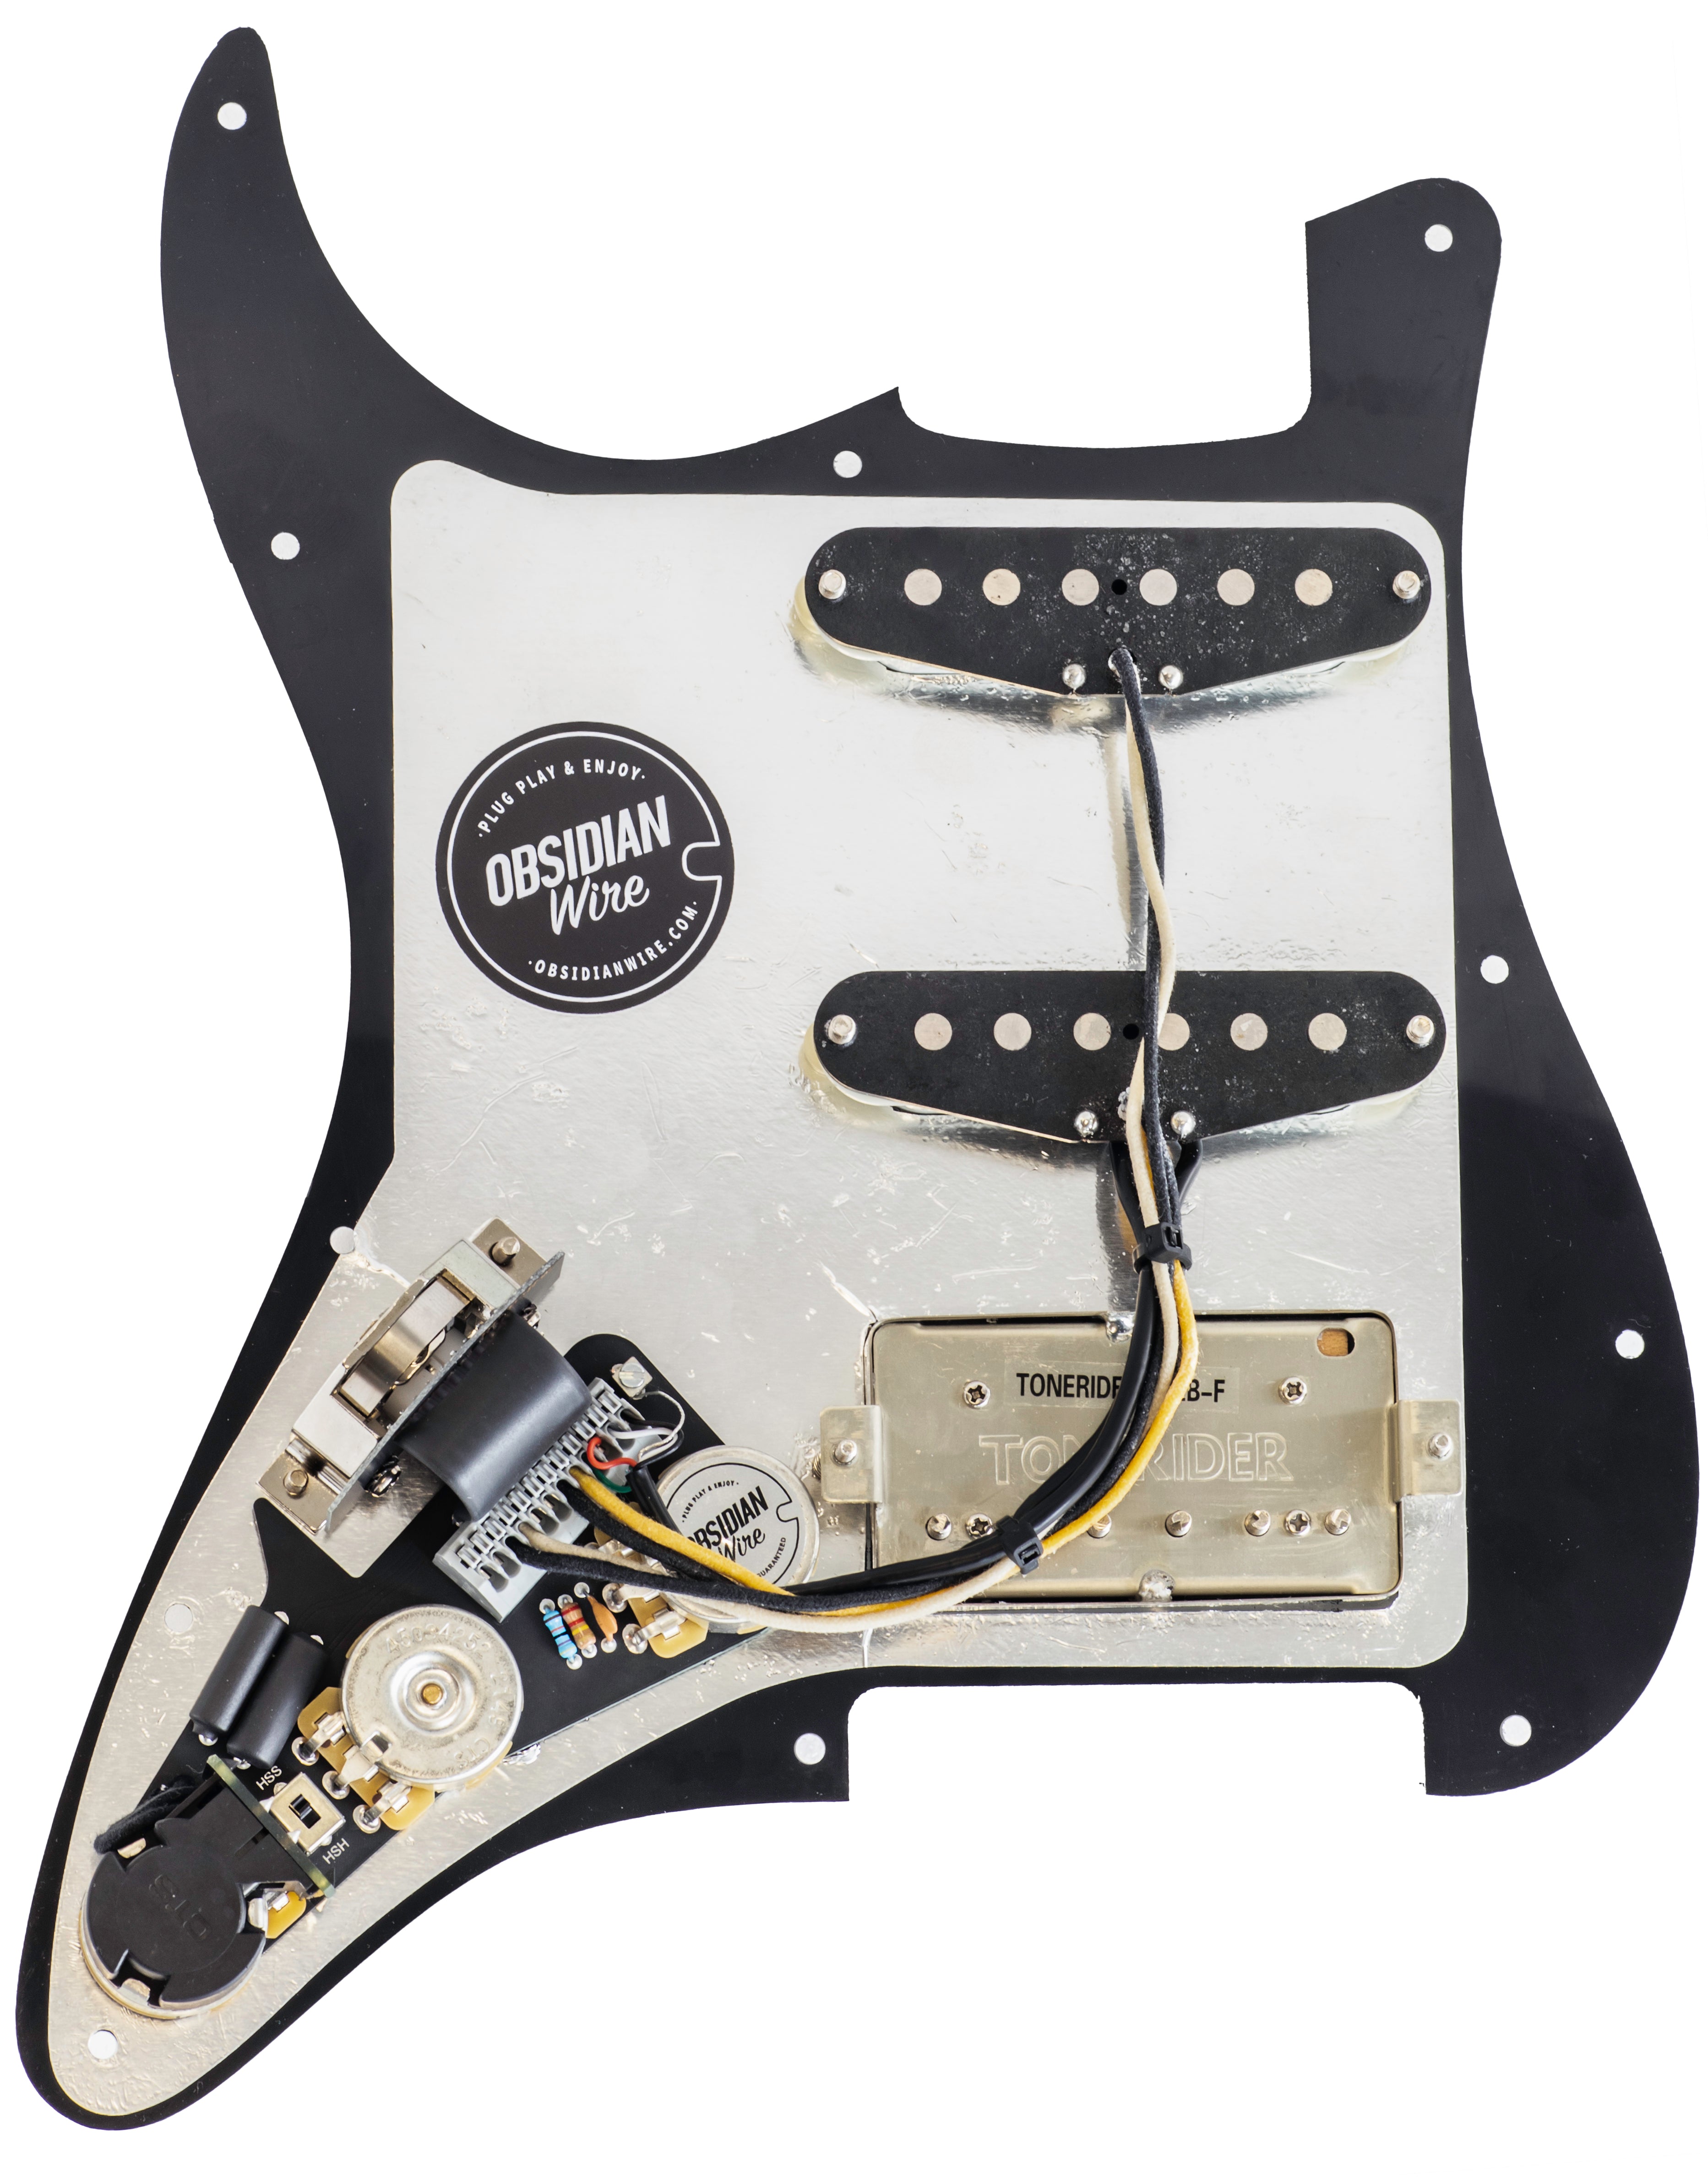 ObsidianWire | Guitar Electronics | Pickups | Accessories